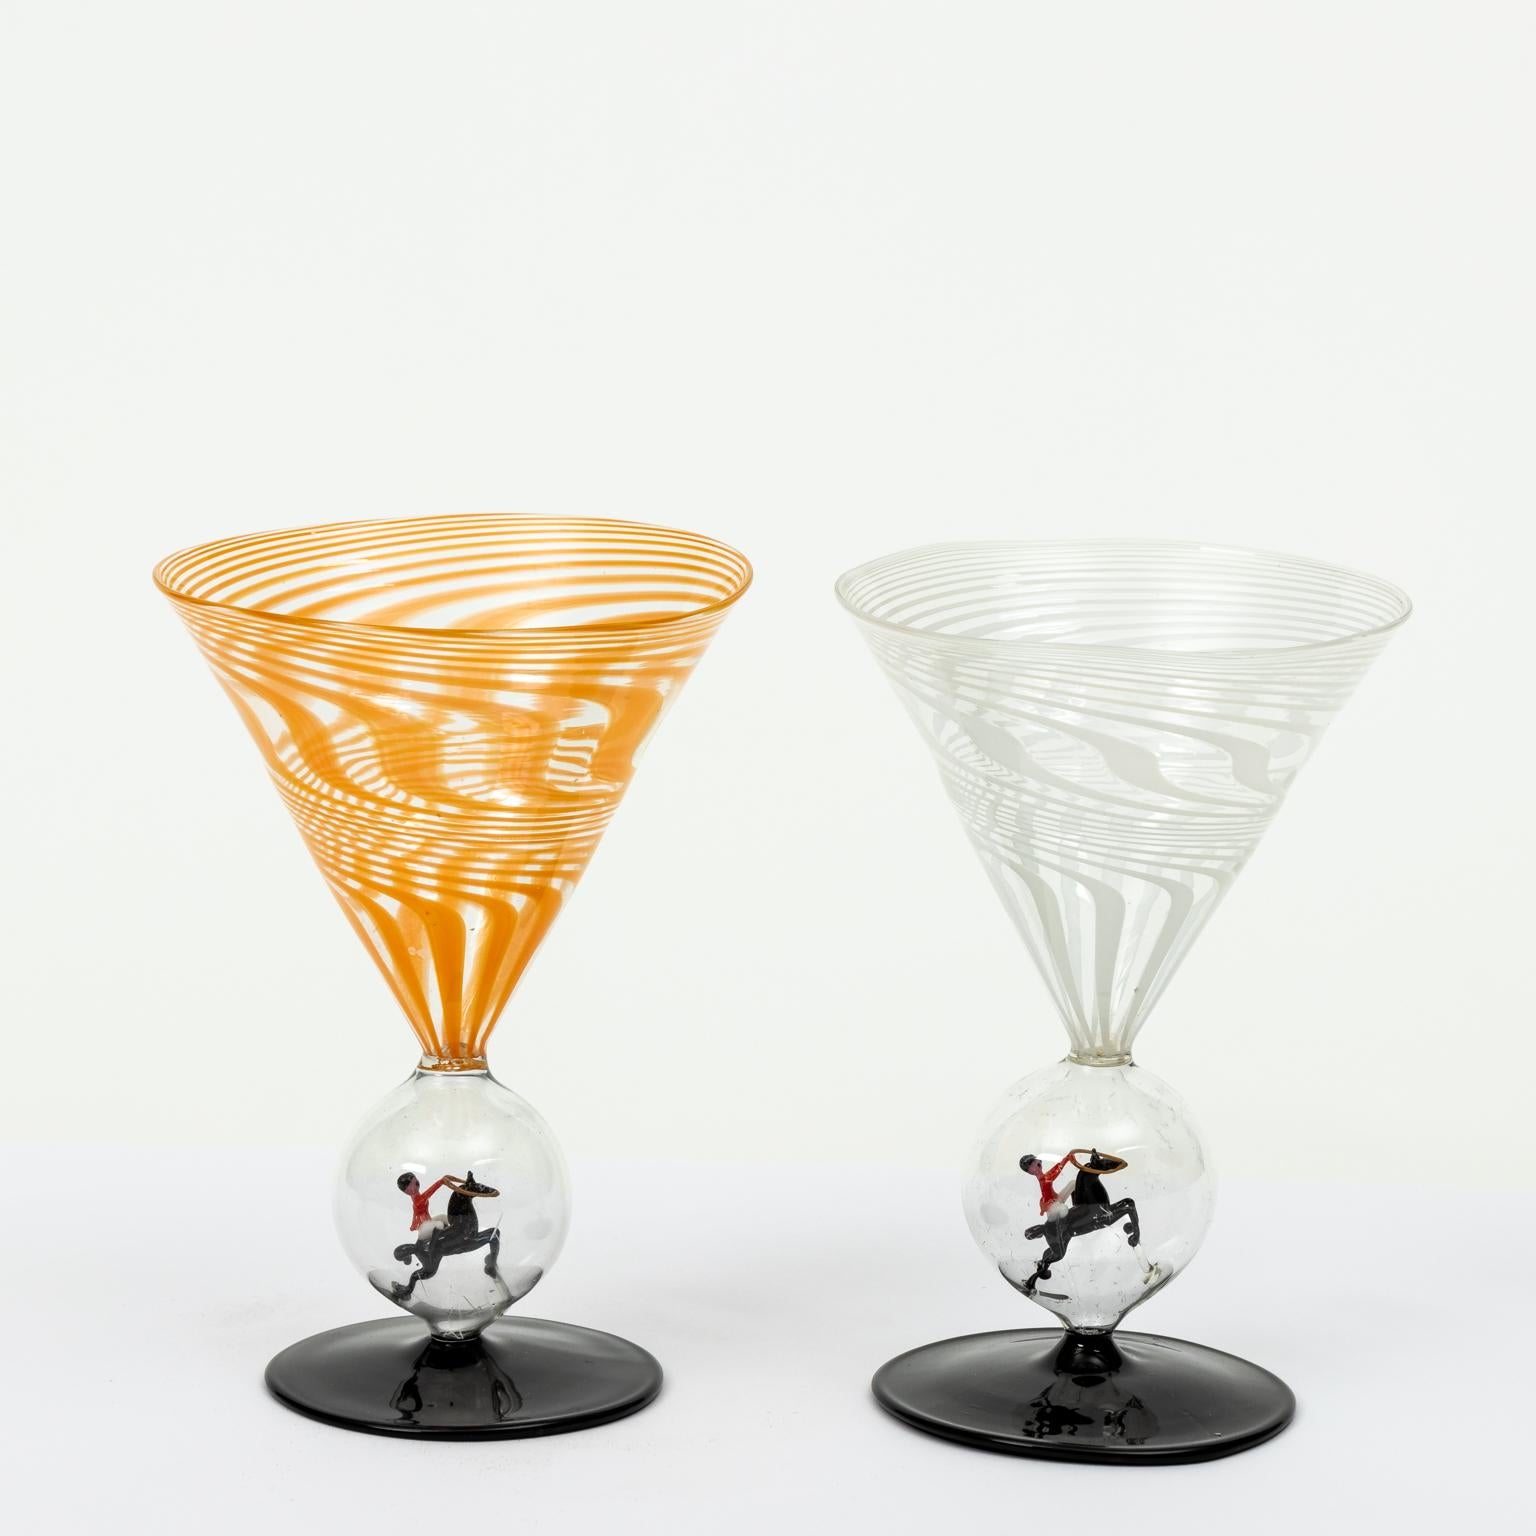 Circa 1920s-1930s set of two Bimini cocktail martini glasses with stirrers. The bowl of the glasses feature an orange and white swirl pattern, while the stems are decorated with capsules containing delicate horsemen figures. Made in Austria. Please